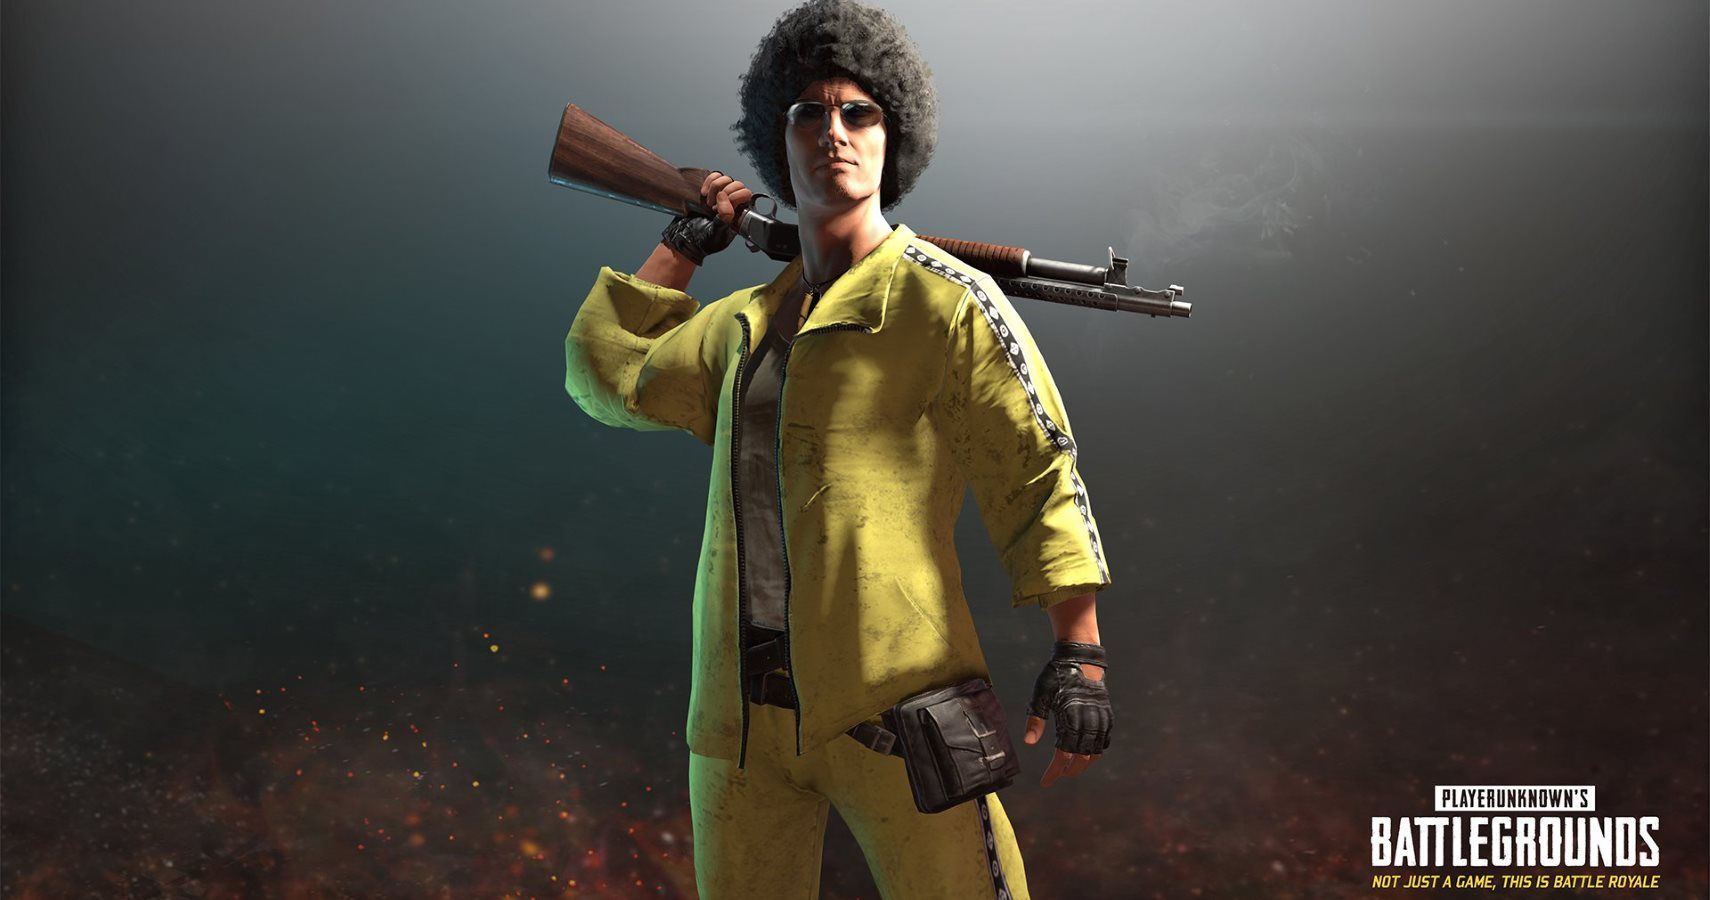 PUBG: 15 Hackers Have Been Arrested And Fined $5.1 Million Total